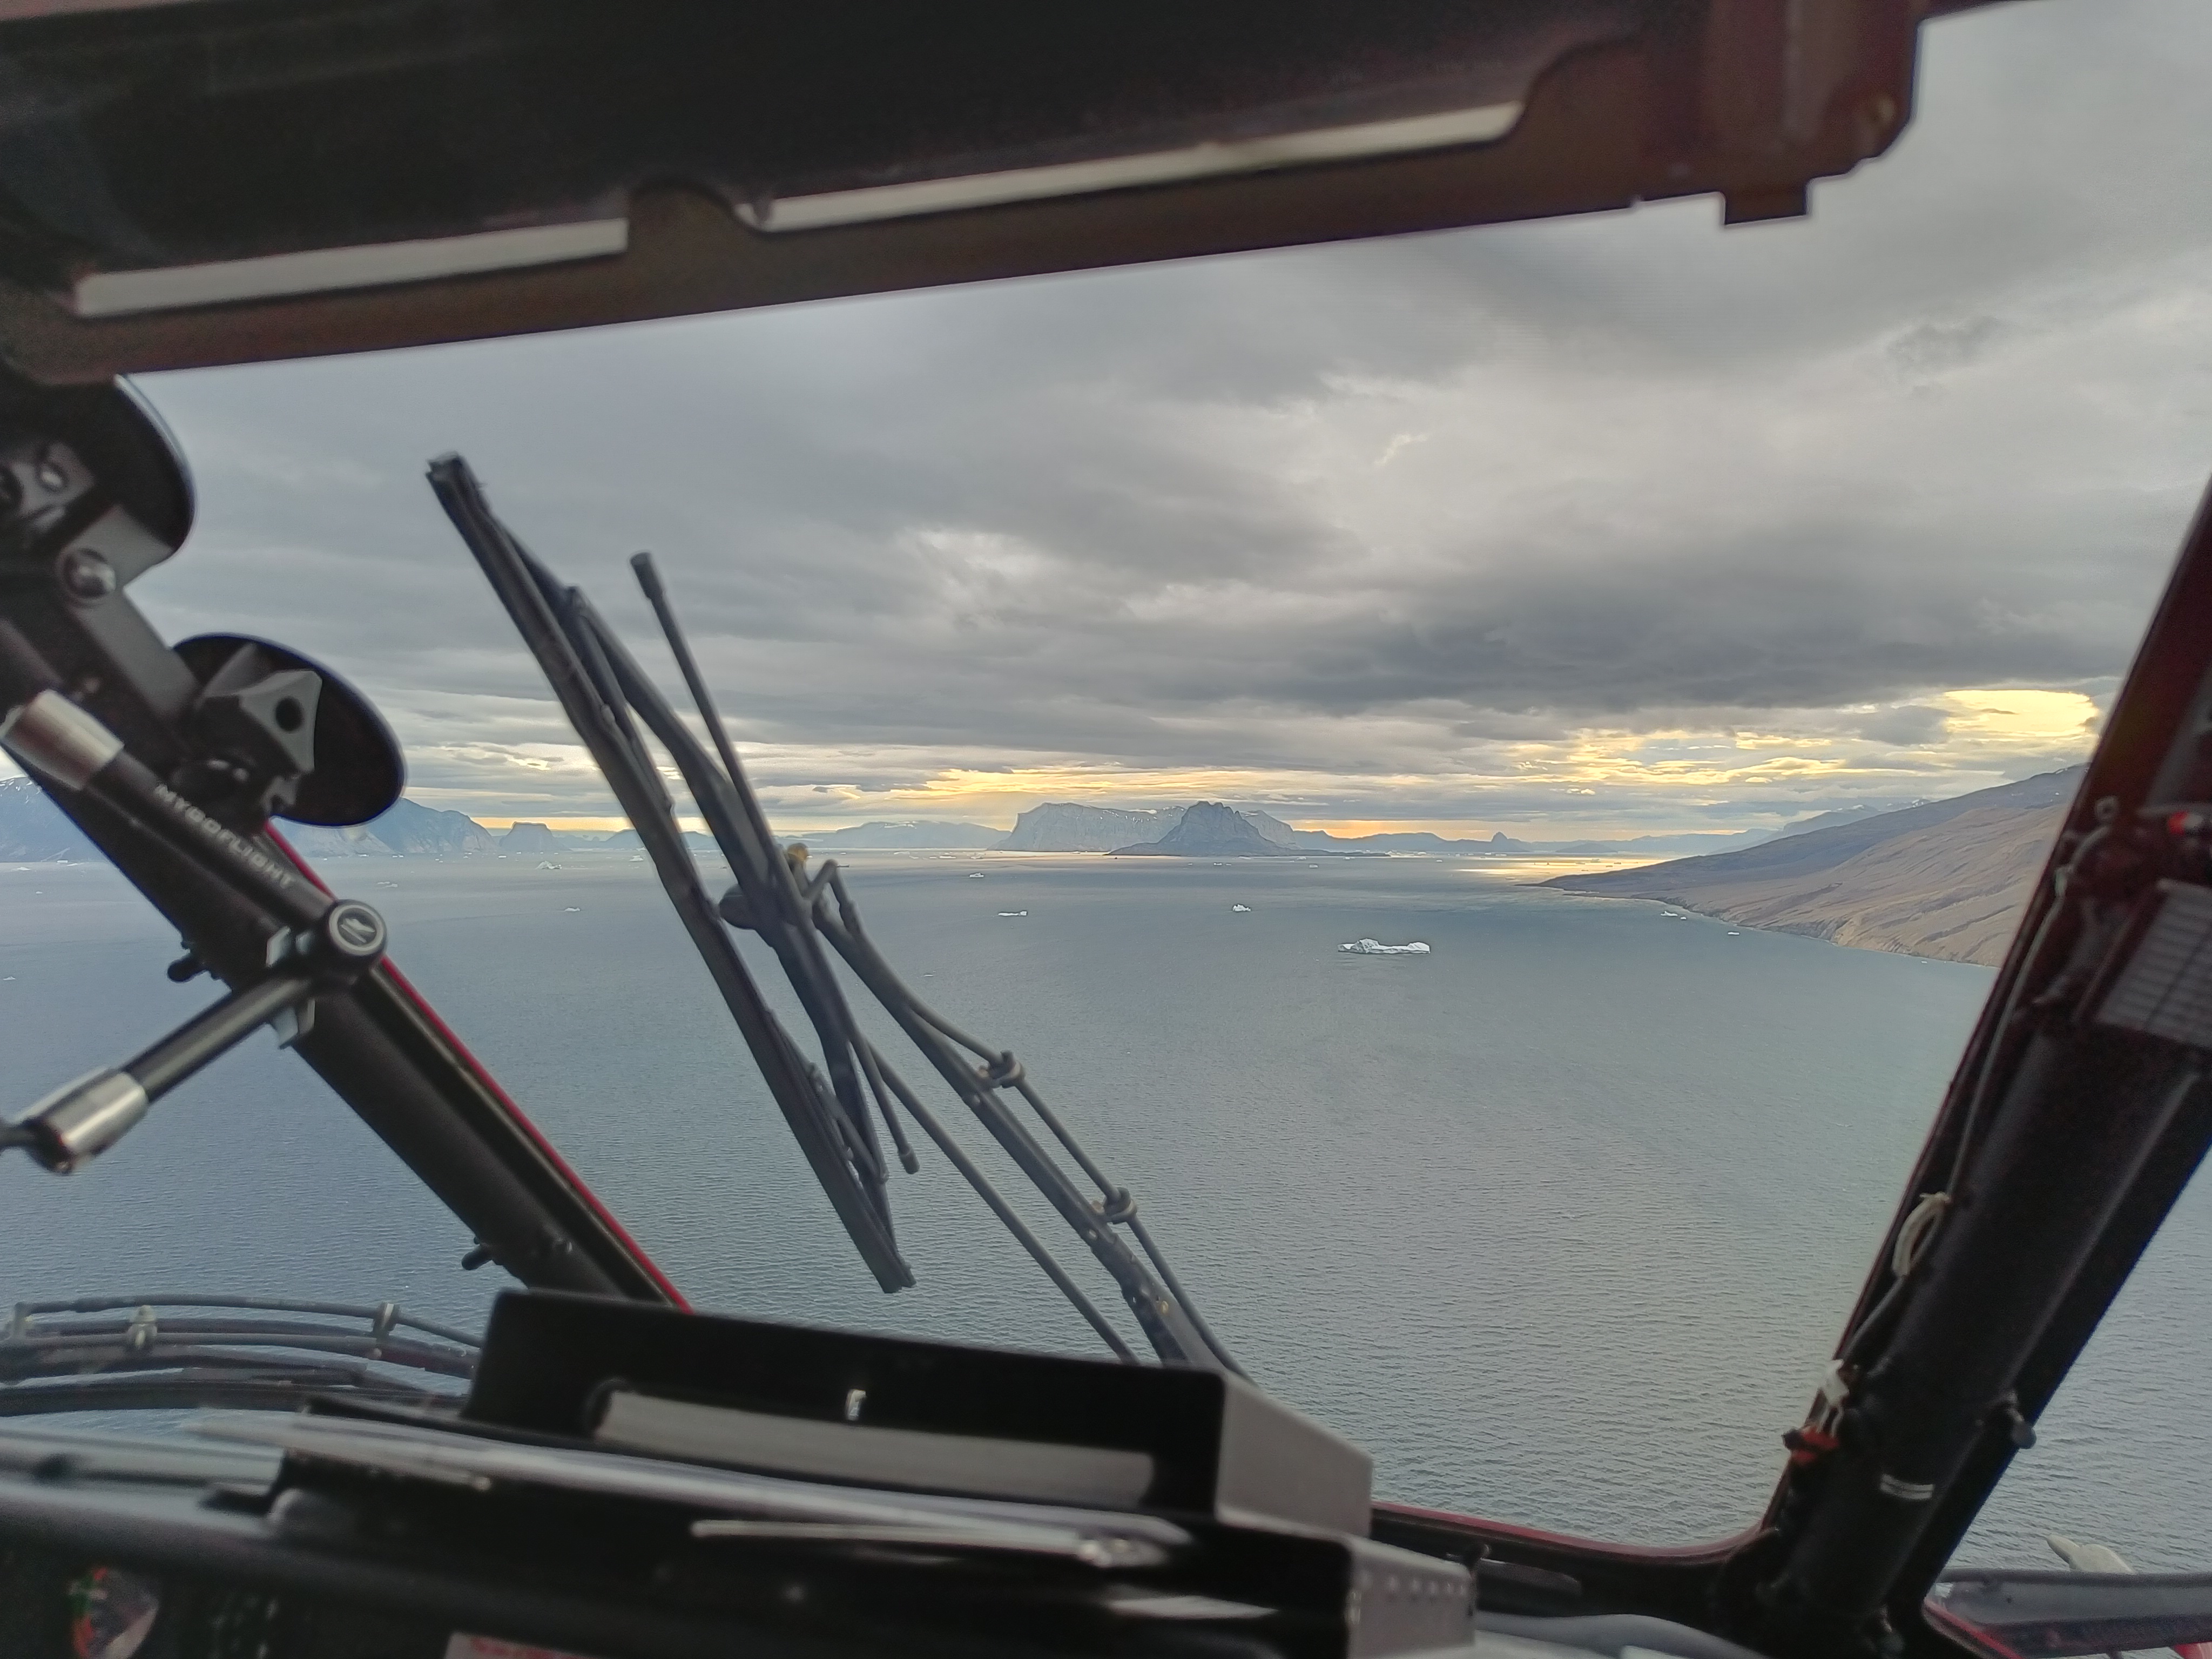 Here is the view from H225 on Monday 5 September during the rescue operation in Uummannaq fjord, with the distinctive Uummannaq mountain visible on the horizon. 